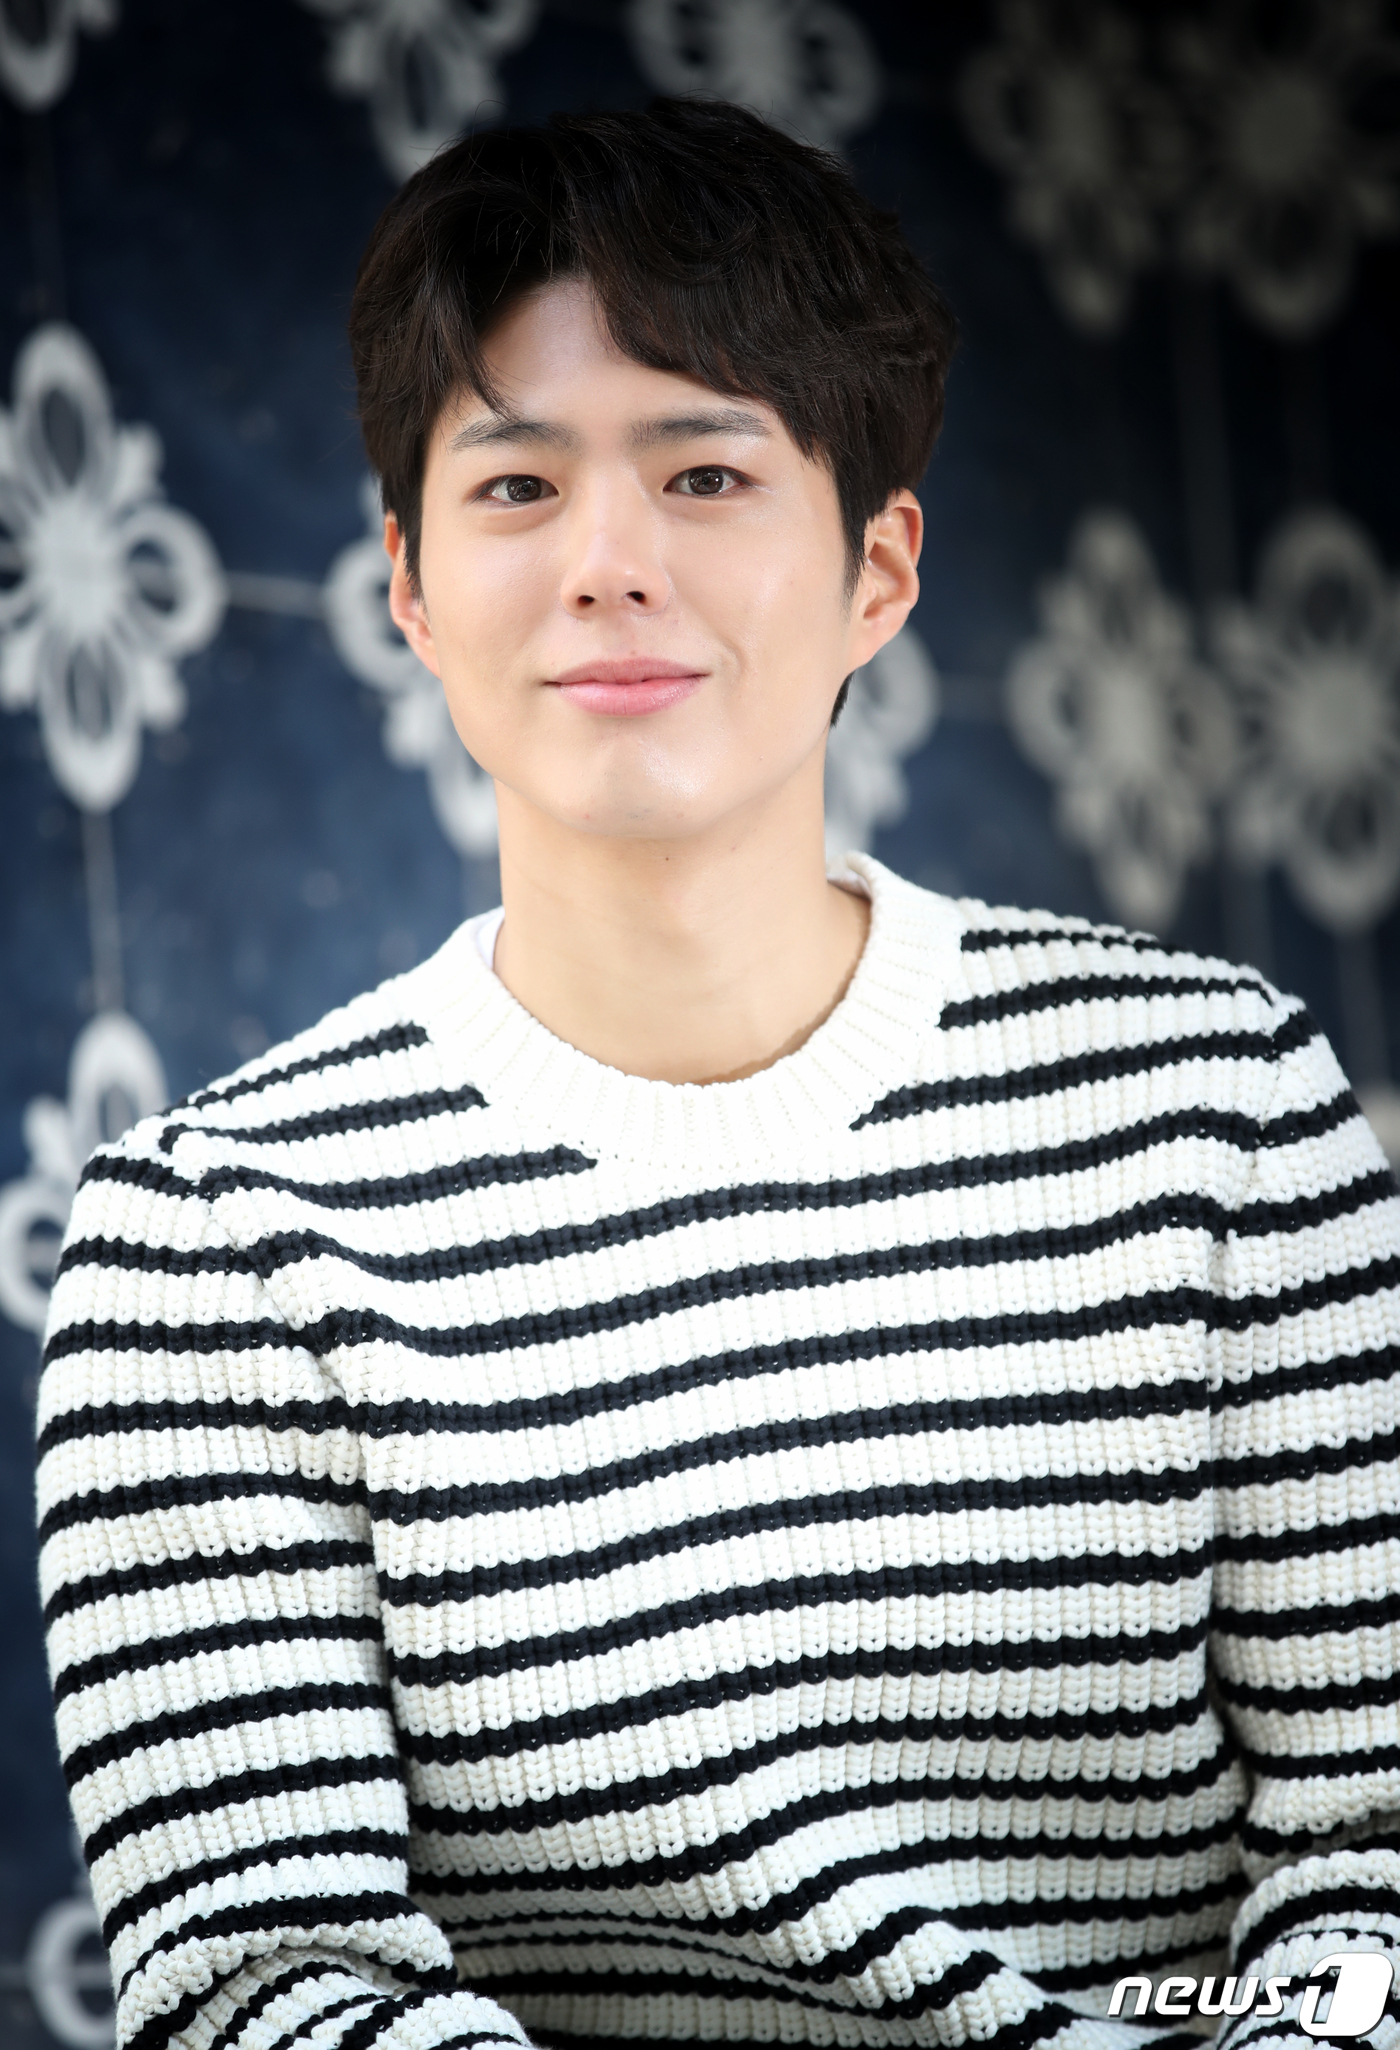 Seoul = = Actor Park Bo-gum(27) is Enlisted as Navy Culture Promotional Disease.Park Bo-gum will enter the Navy Basic Military Education Center in Navy Education Command in Jinhae-gu, Changwon-si, Gyeongsangnam-do on the 31st.Park Bo-gum continues his active military service as a Navy cultural publicist after six weeks of basic training here.Initially, the basic training for Navy will be 5 weeks including the enlistment, but the training period will increase to 6 weeks from the 31st enlistment.The Enlisted of Park Bo-gum on this day is Private, and the place and time are quietly done without special procedures or events.I am sorry to have Enlisted without giving a brief greeting, but now it is time to consider social distance and health for everyone because of COVID-19, the agency said. I am sorry to have Enlisted without giving a brief greeting, He said.I am asking for your understanding and understanding because it is an inevitable decision for the health and various safety of the fans and the reporters.Park Bo-gum is set to air TVN drama Youth Record; Youth Record finished all the shoots early on in line with Park Bo-gums Enlisted schedule.